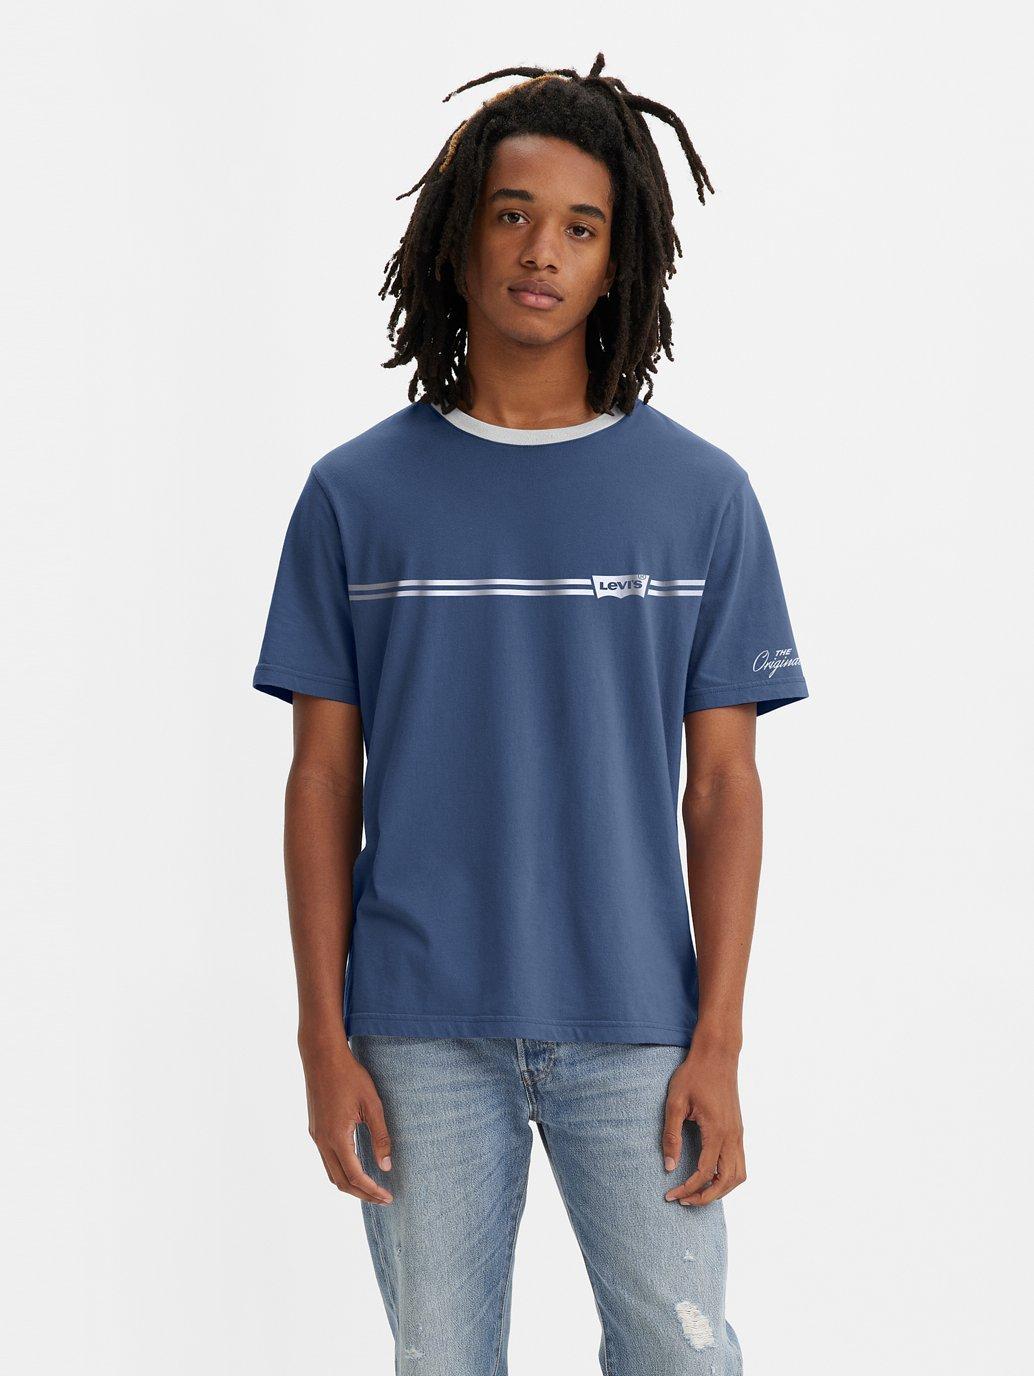 Buy Levi's® Men's Relaxed Fit Short Sleeve Graphic T-Shirt | Levis®  Official Online Store MY